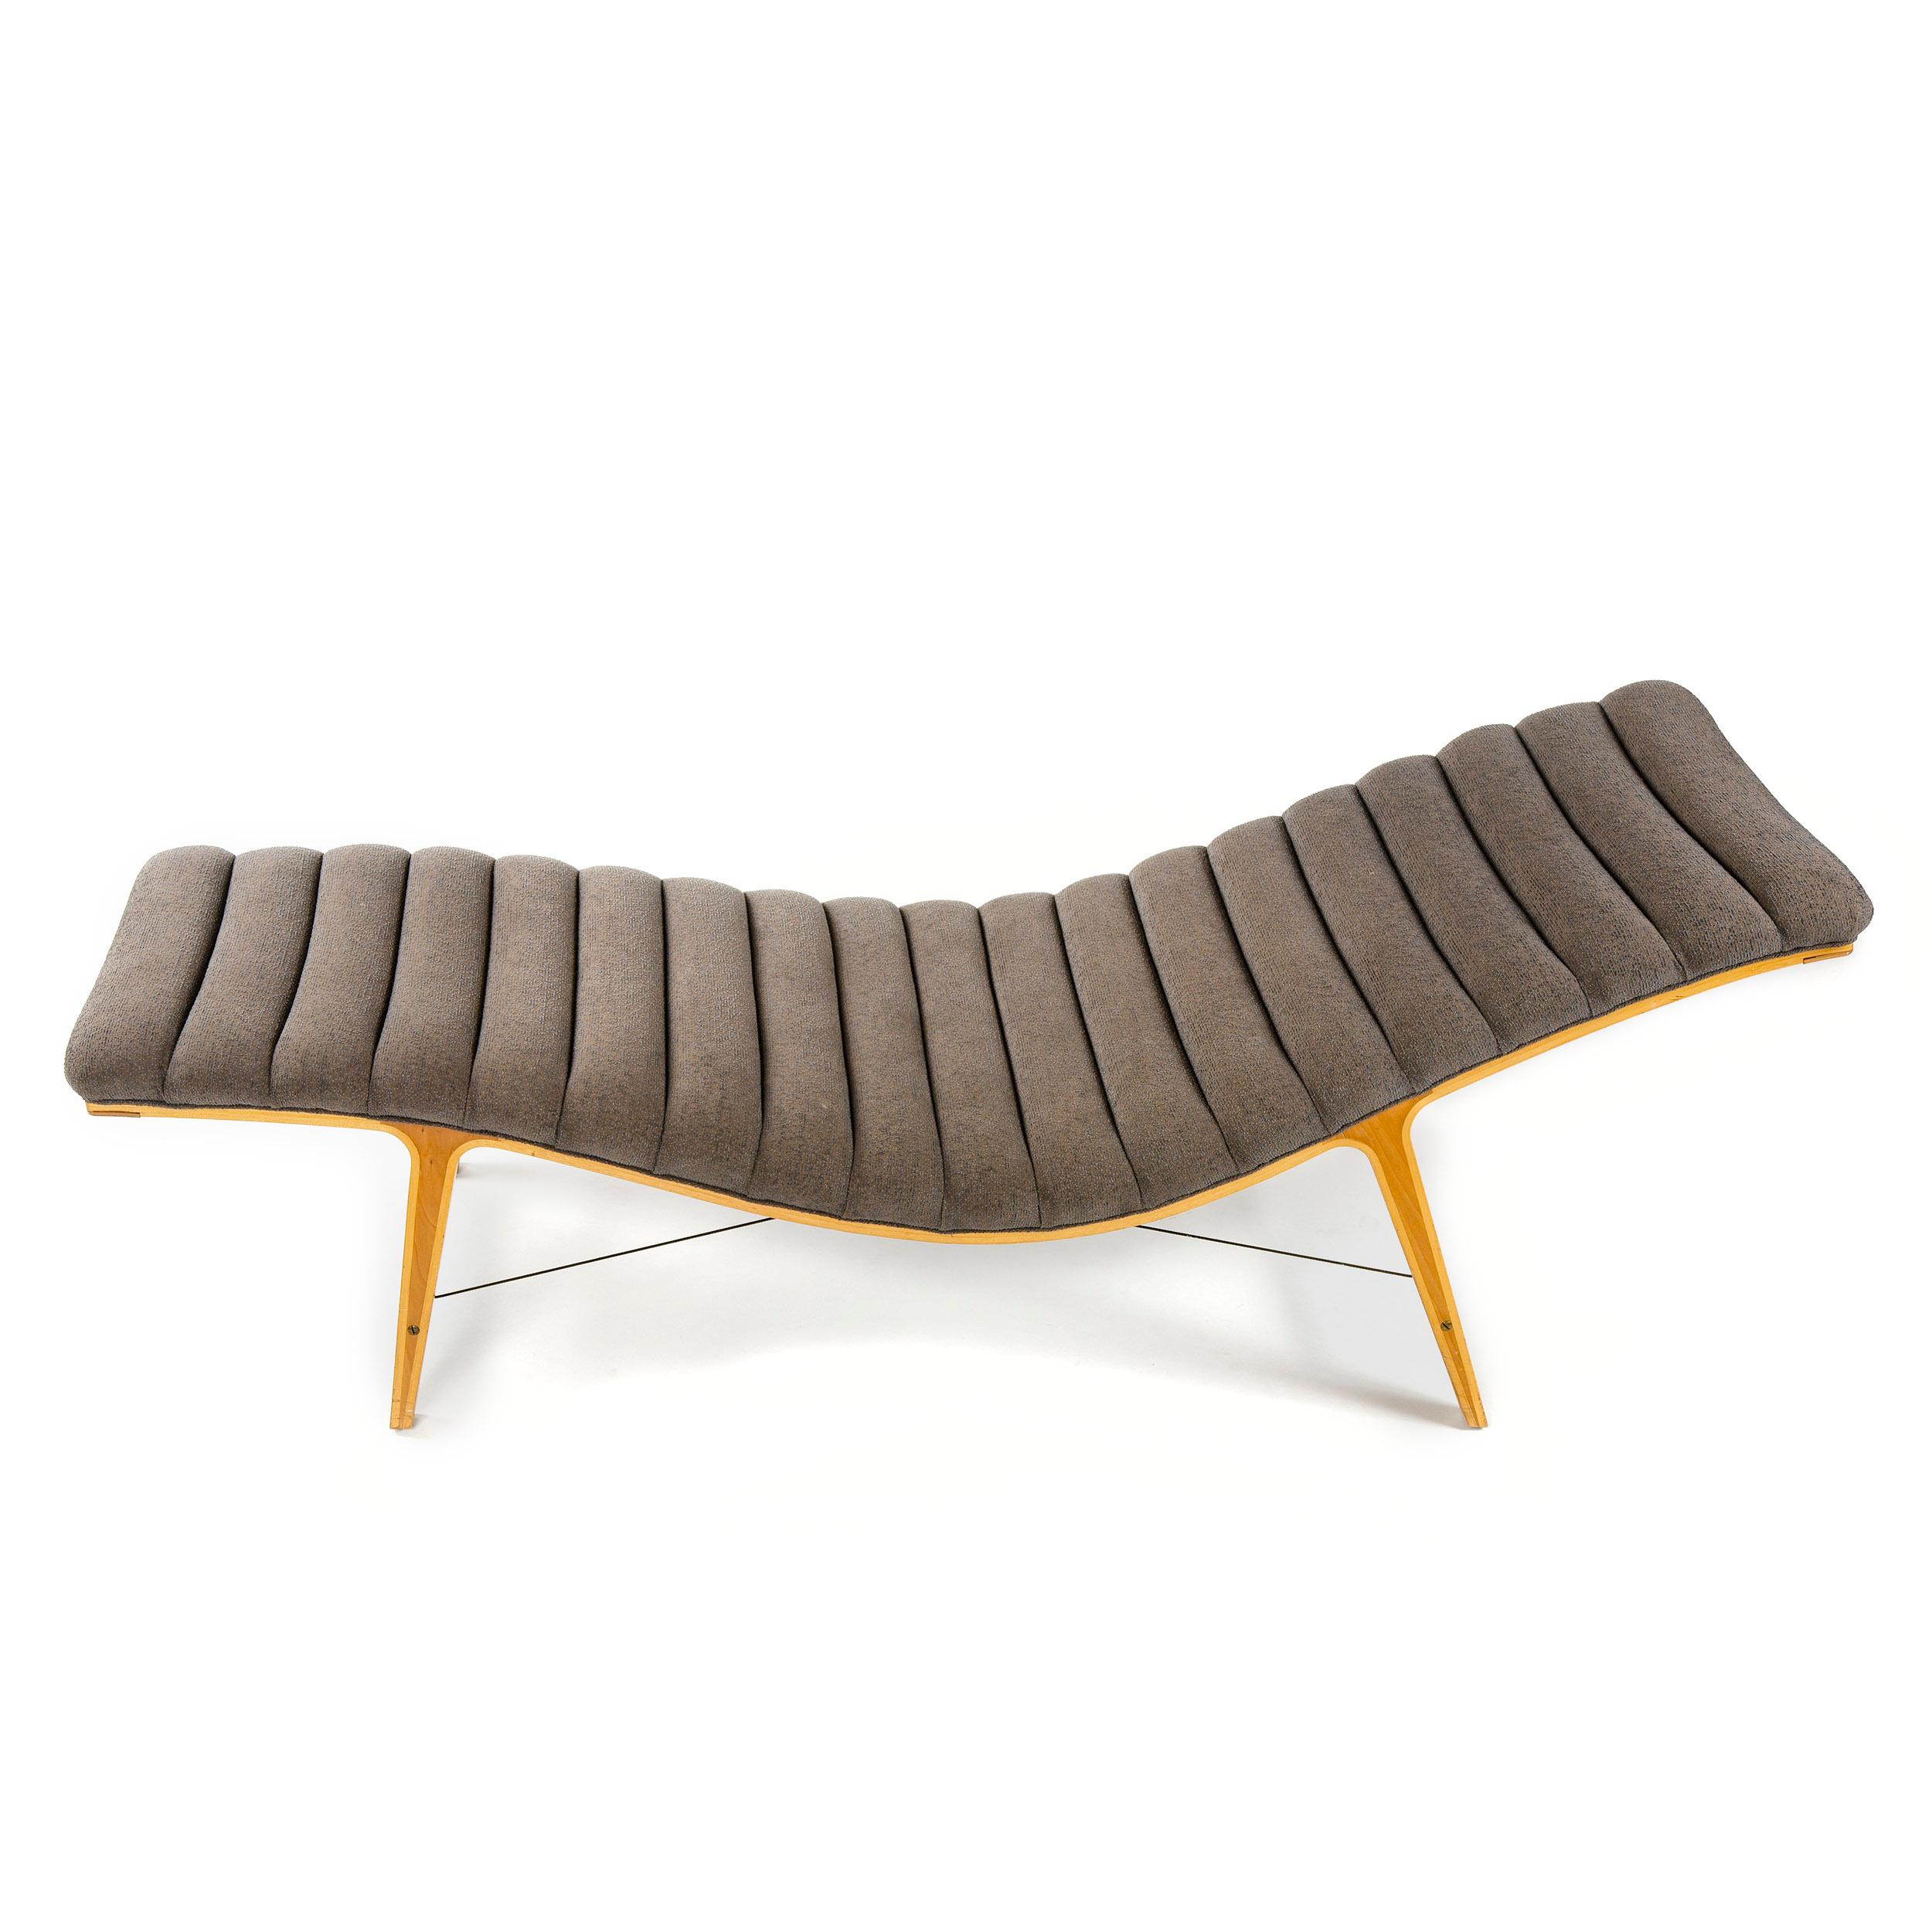 An elegant chaise lounge with an undulating cushion in vintage upholstery with a cherry and maple base and solid brass supports. Model: 4873.